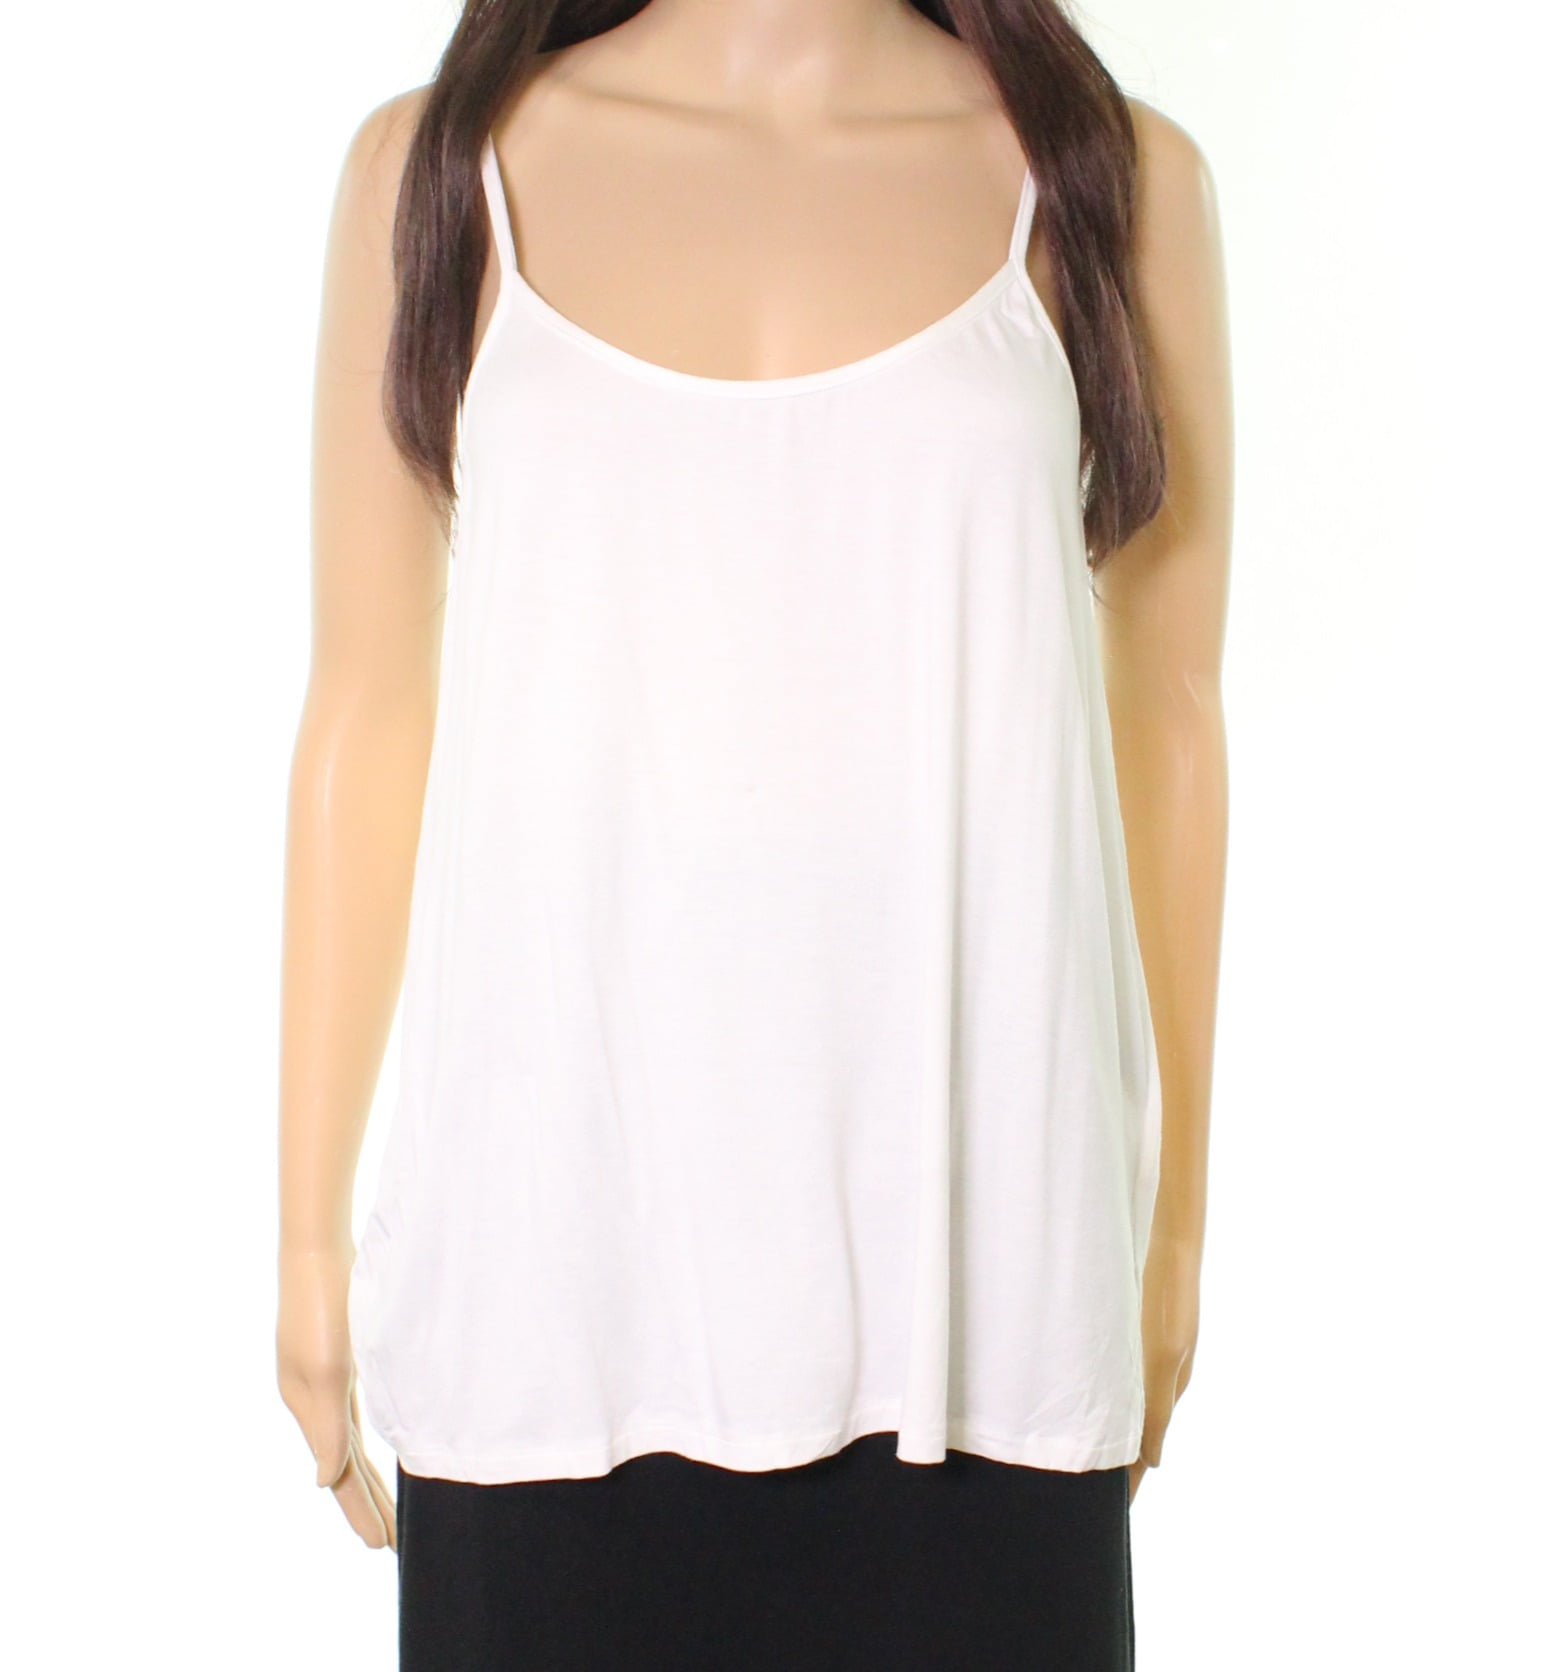 Pure DKNY - Pure DKNY NEW White Womens Size Large L Scoop Neck Stretch ...